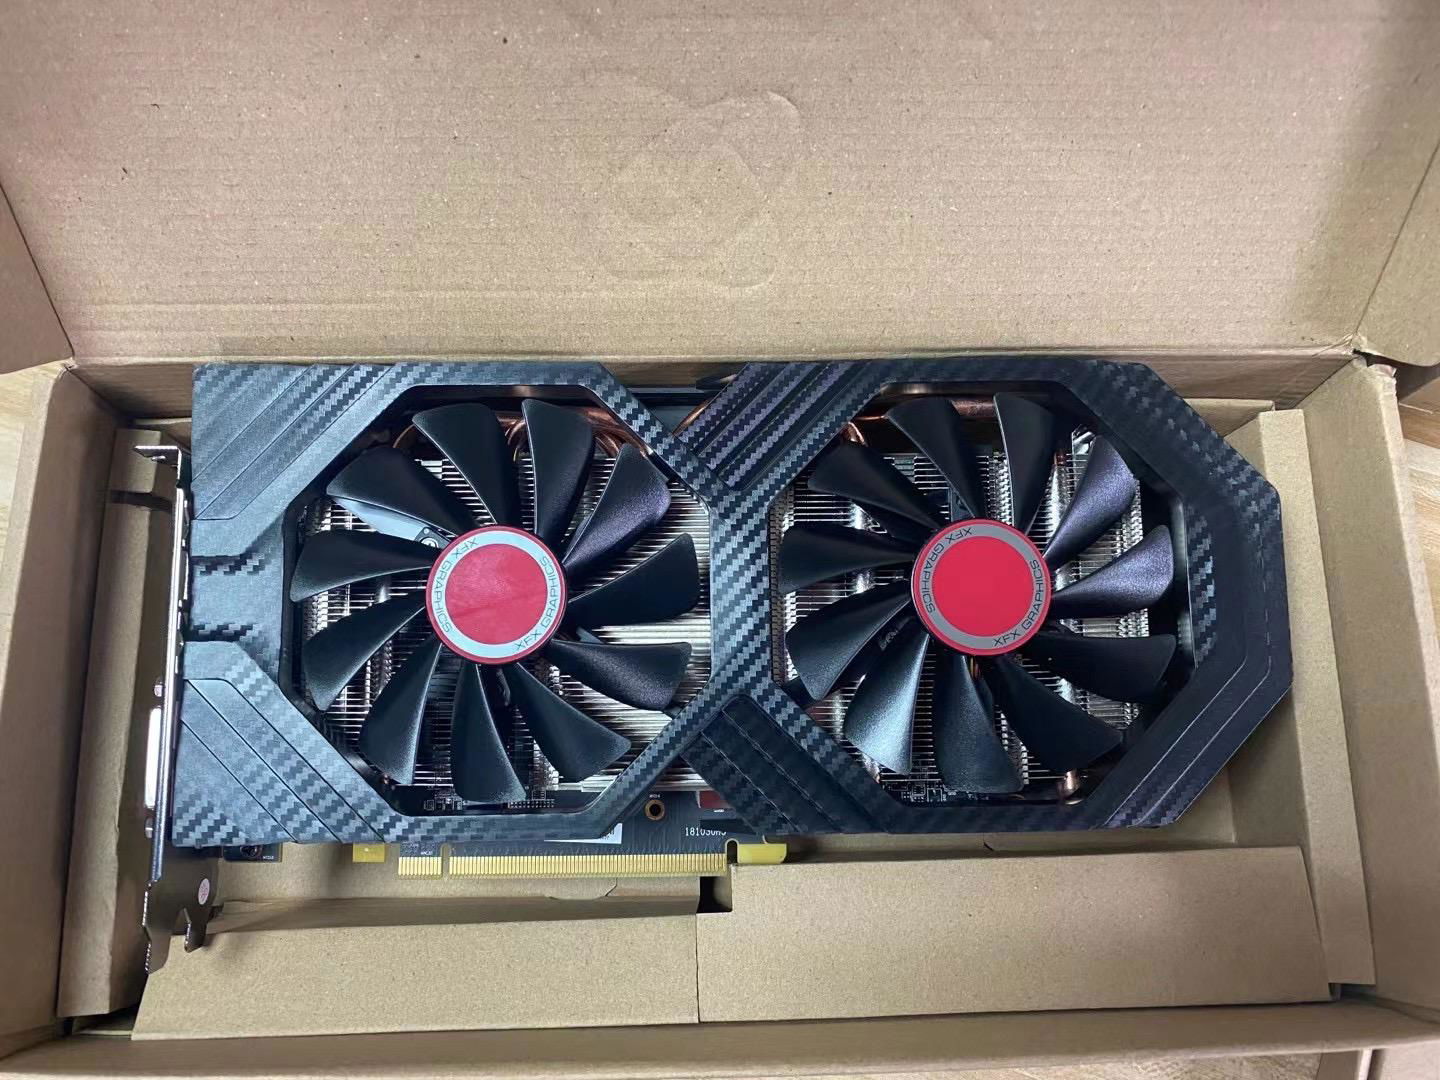  XFX RX580 8GB AMD Radeon Graphic Cards For Games computer use 4